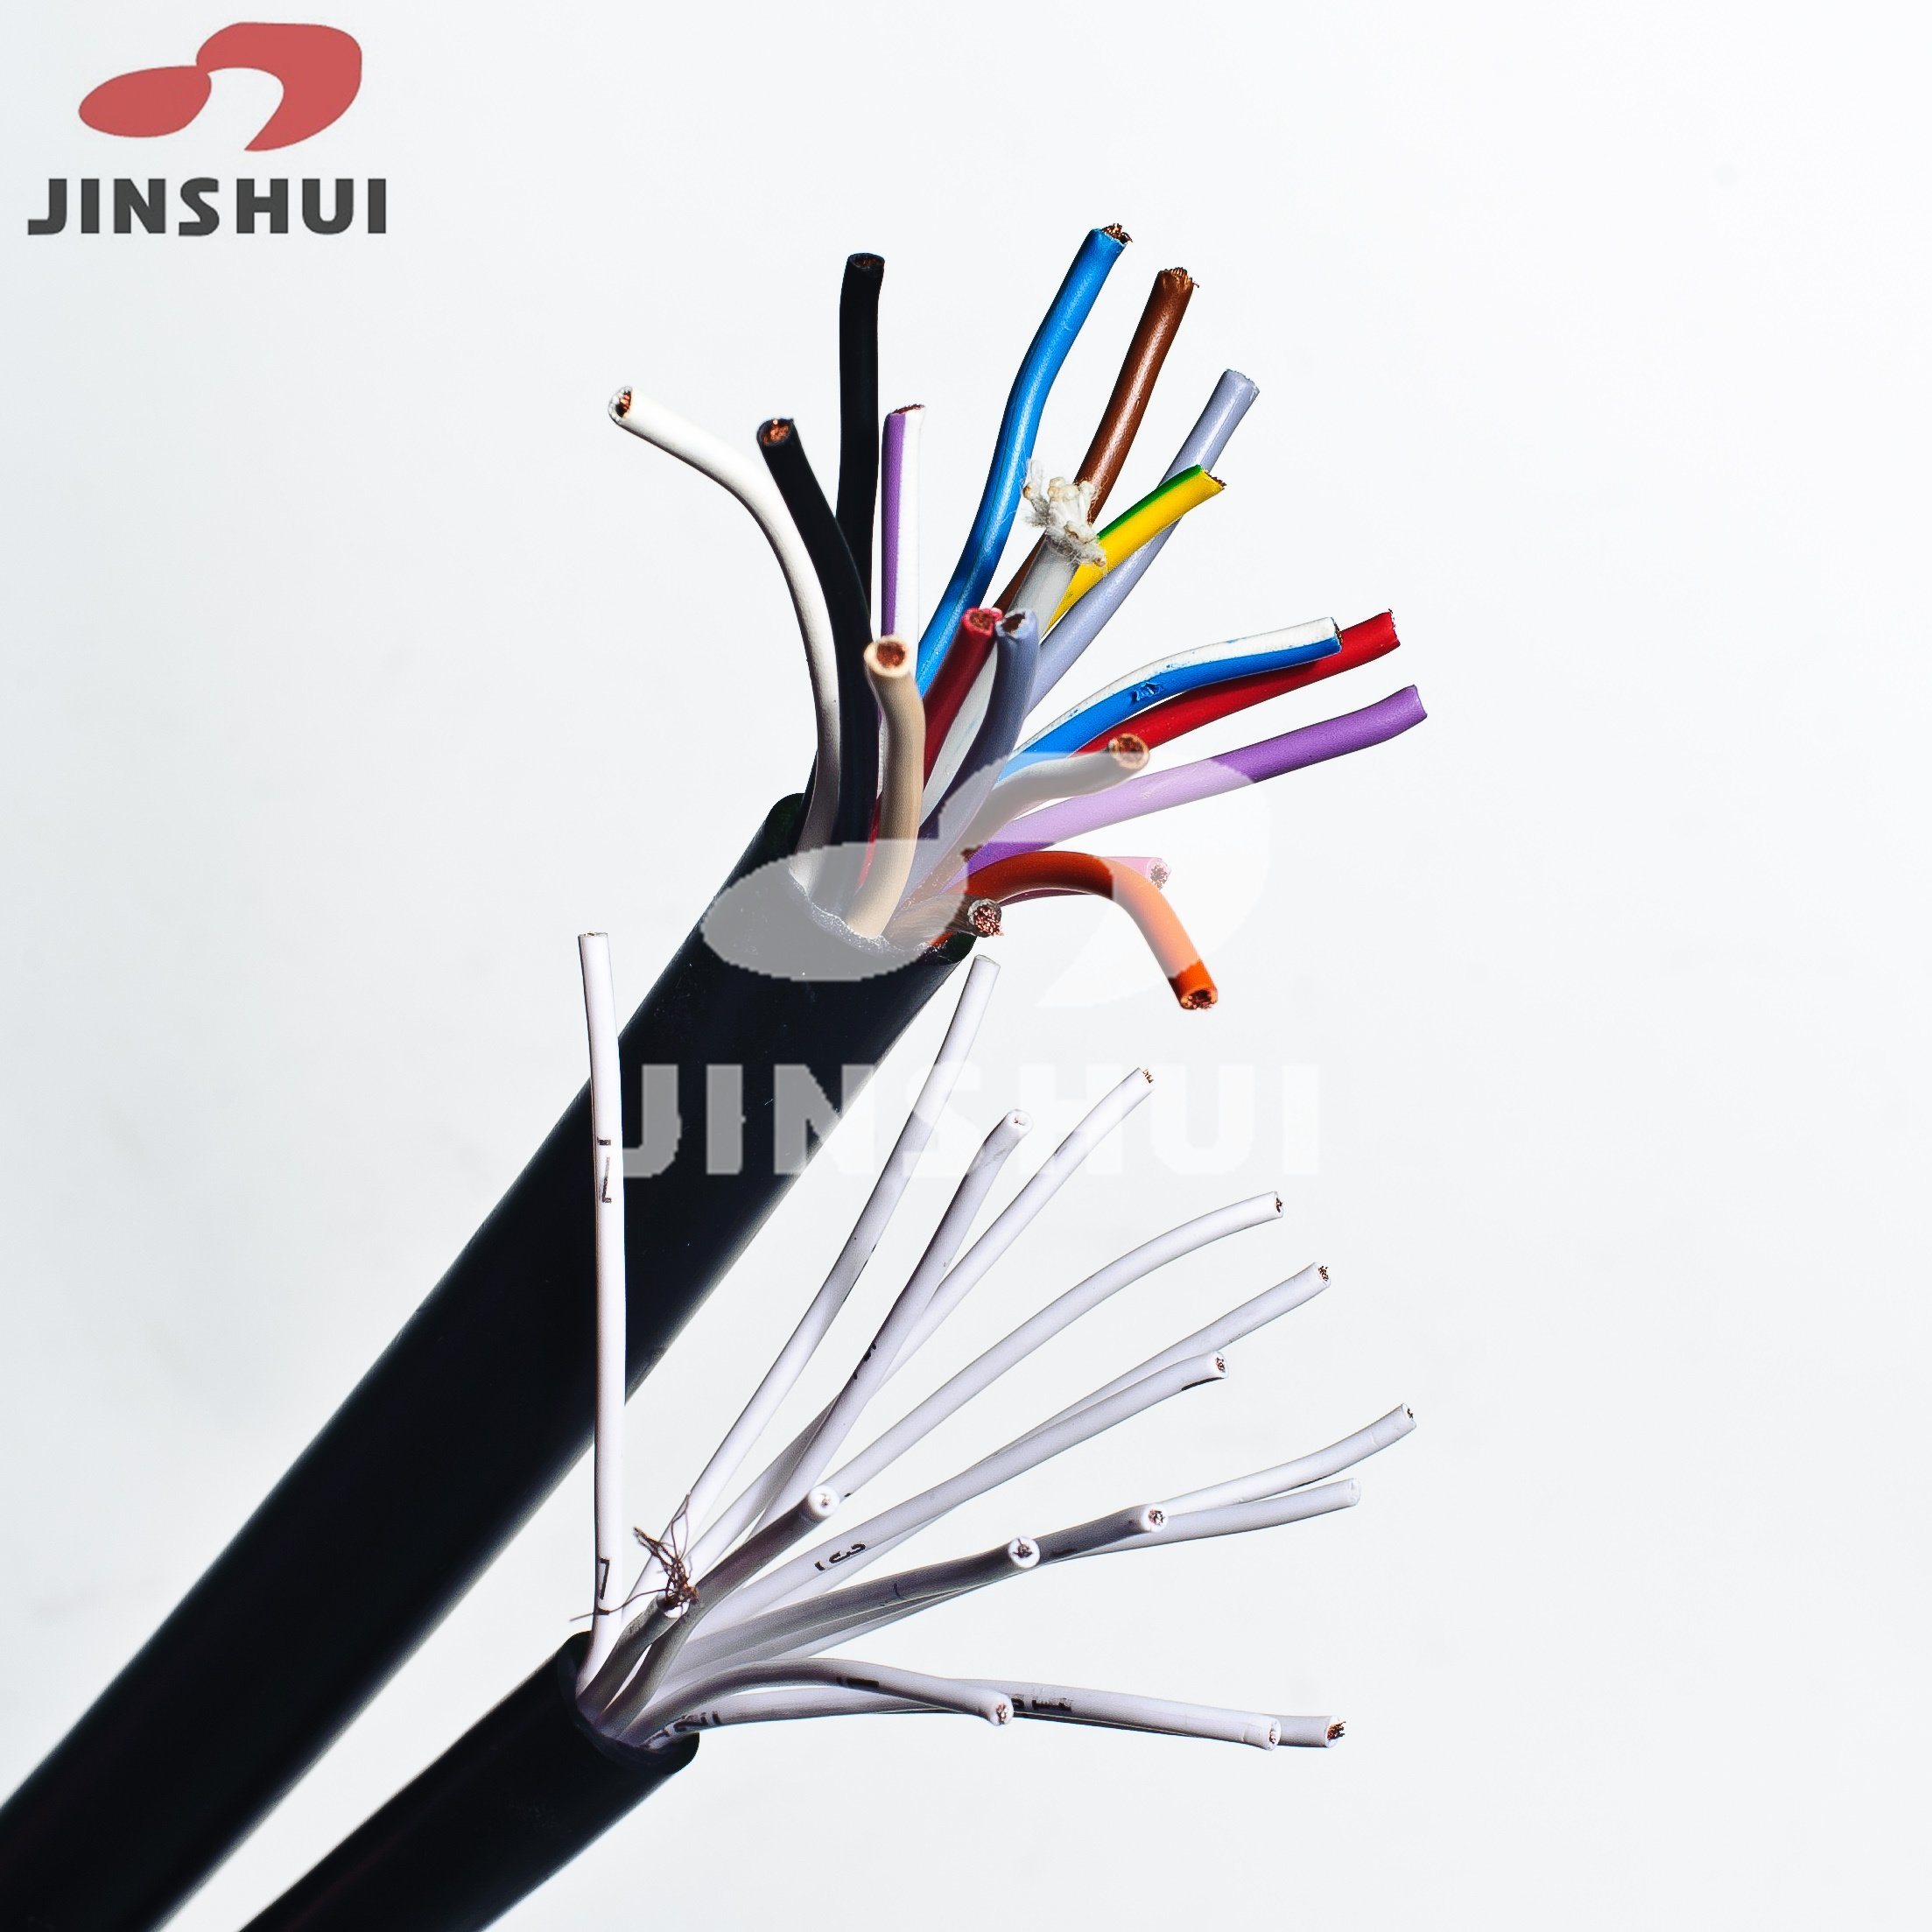 XLPE 3.5mm Audio Cable, Fire Alarm XLPE Marine Electrical Control Cable